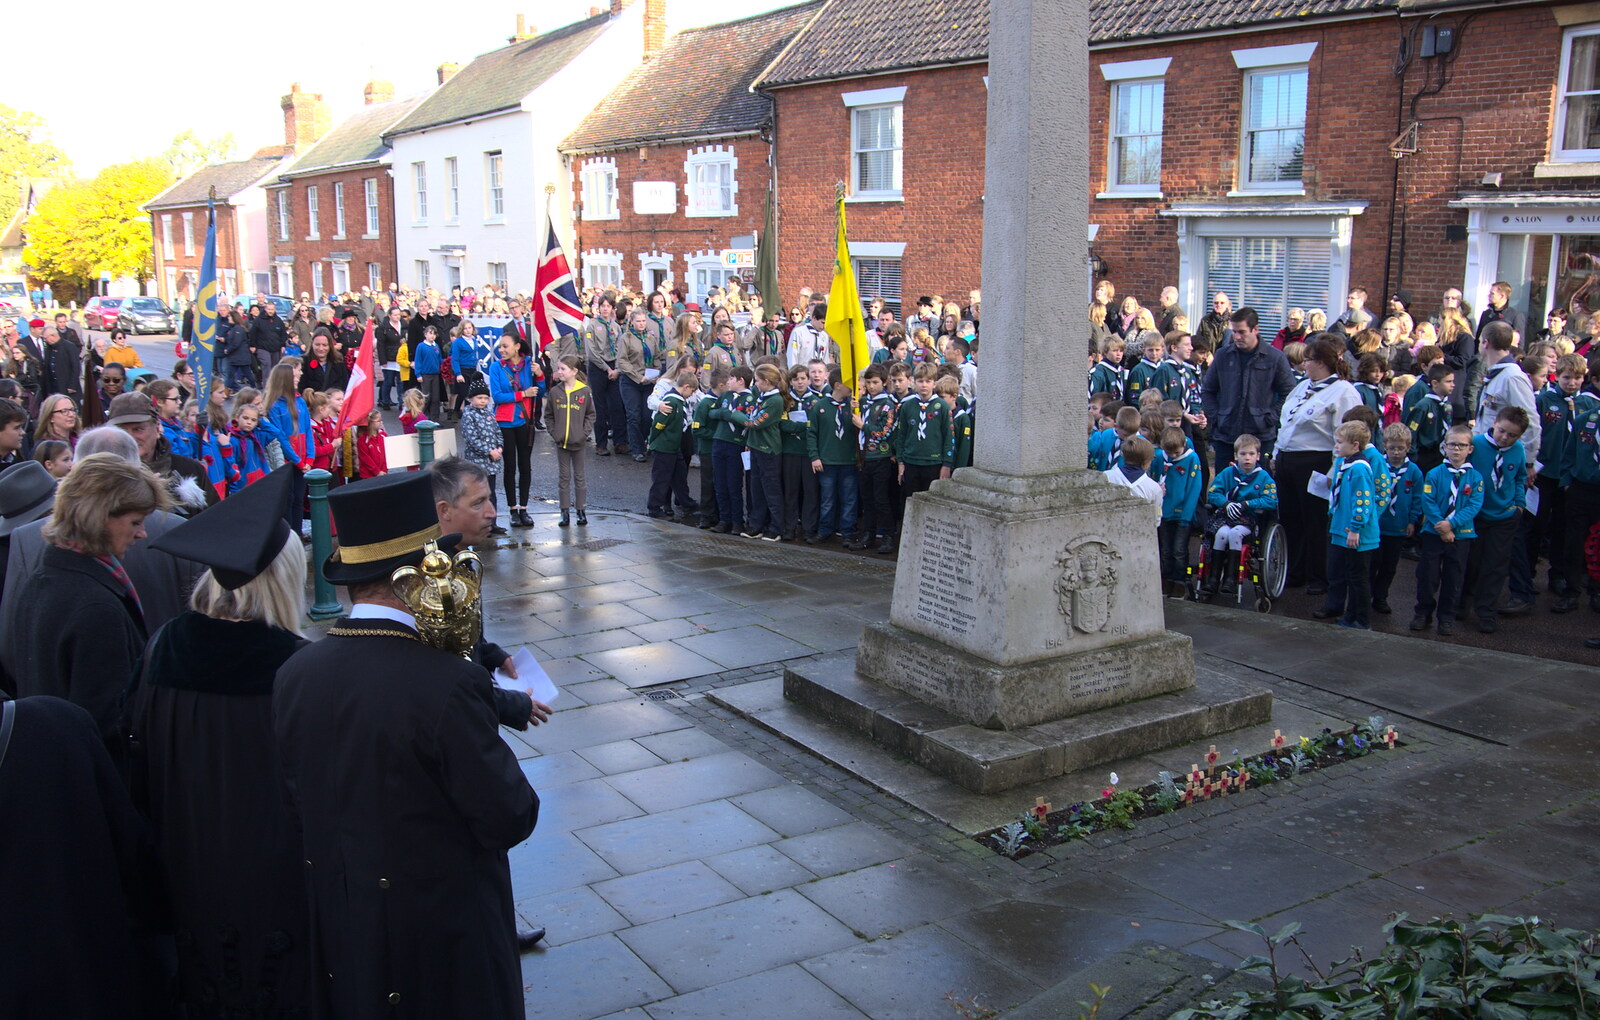 The parade is assembled around the war memorial from The Remembrance Sunday Parade, Eye, Suffolk - 11th November 2018